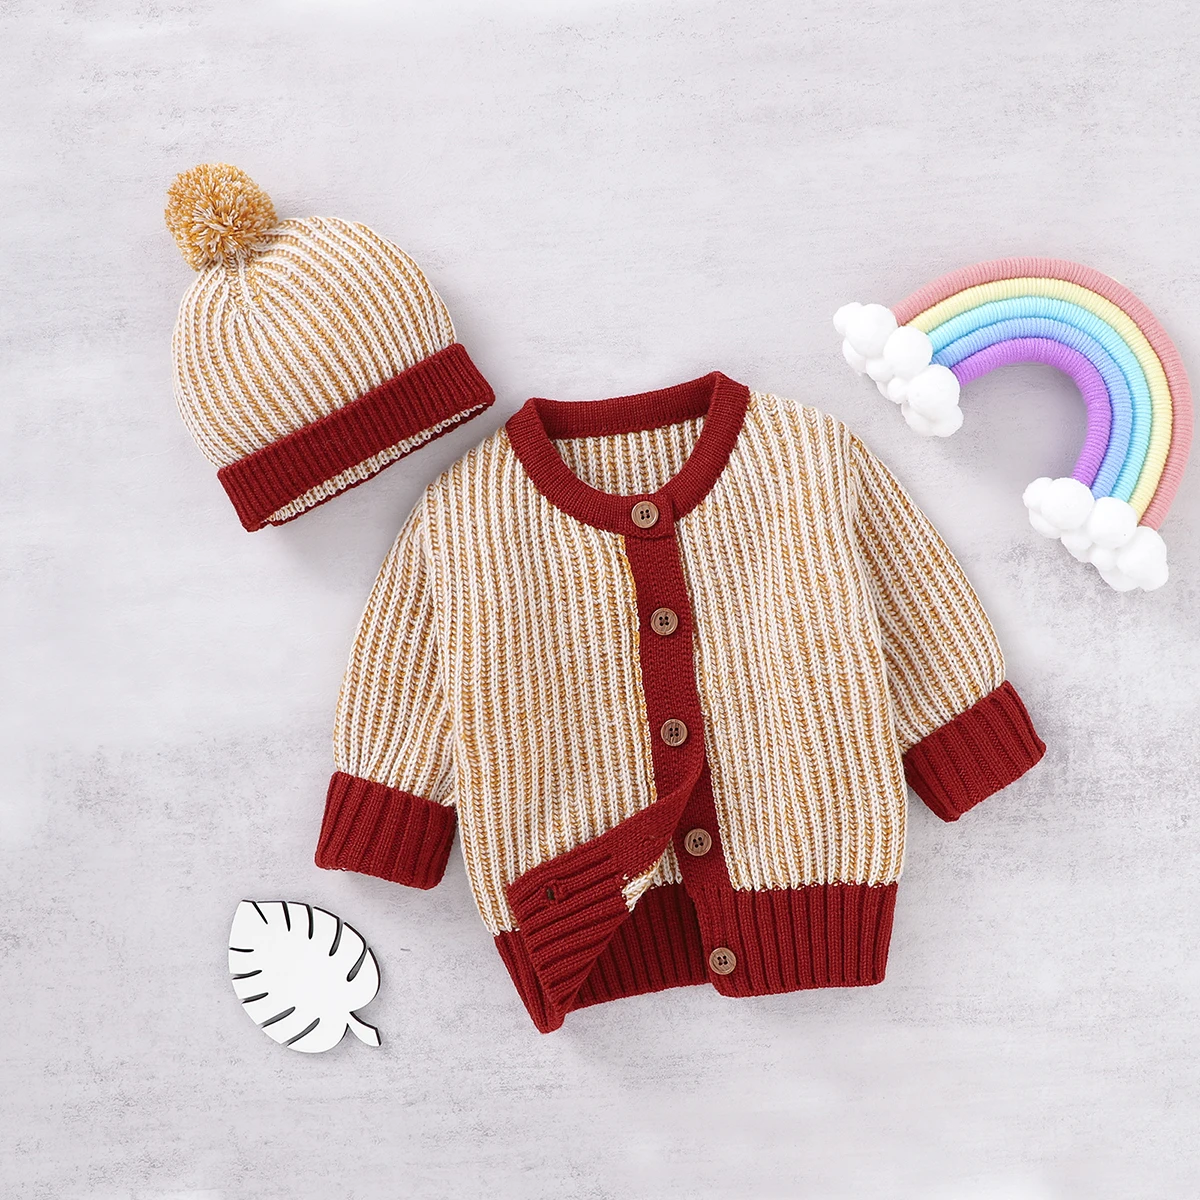 

Baby Swaters Autumn Solid Long Sleeve Newborn Boys Girls Knitted Cardigans Hats Clothes Sets Winter Toddler Infant Knitwear 0-2Y